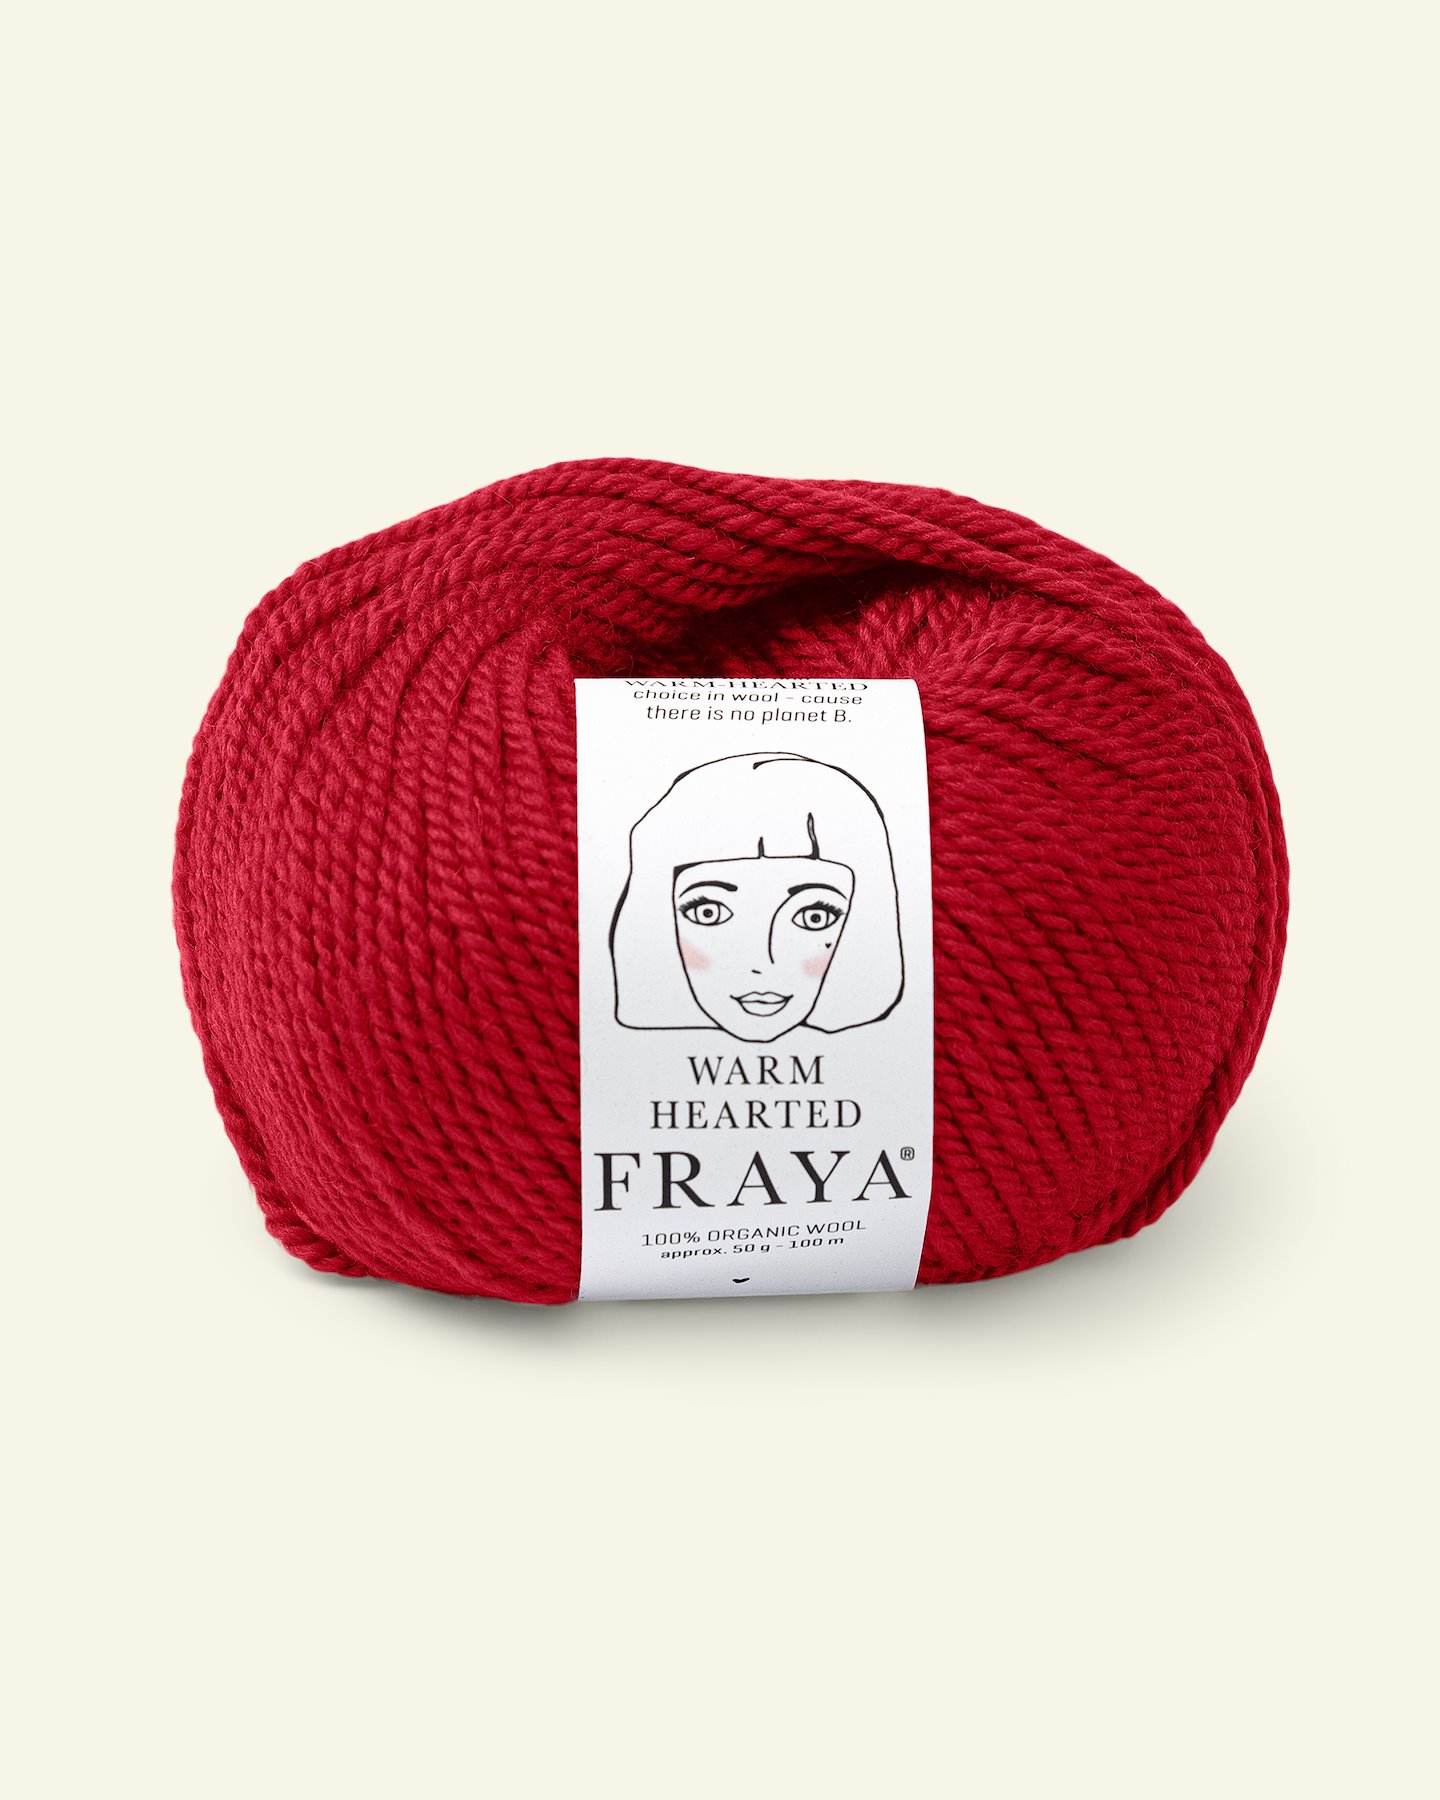 FRAYA, Wolle 100% Bio Wolle "Warm Hearted", dunkelrot 90000925_pack